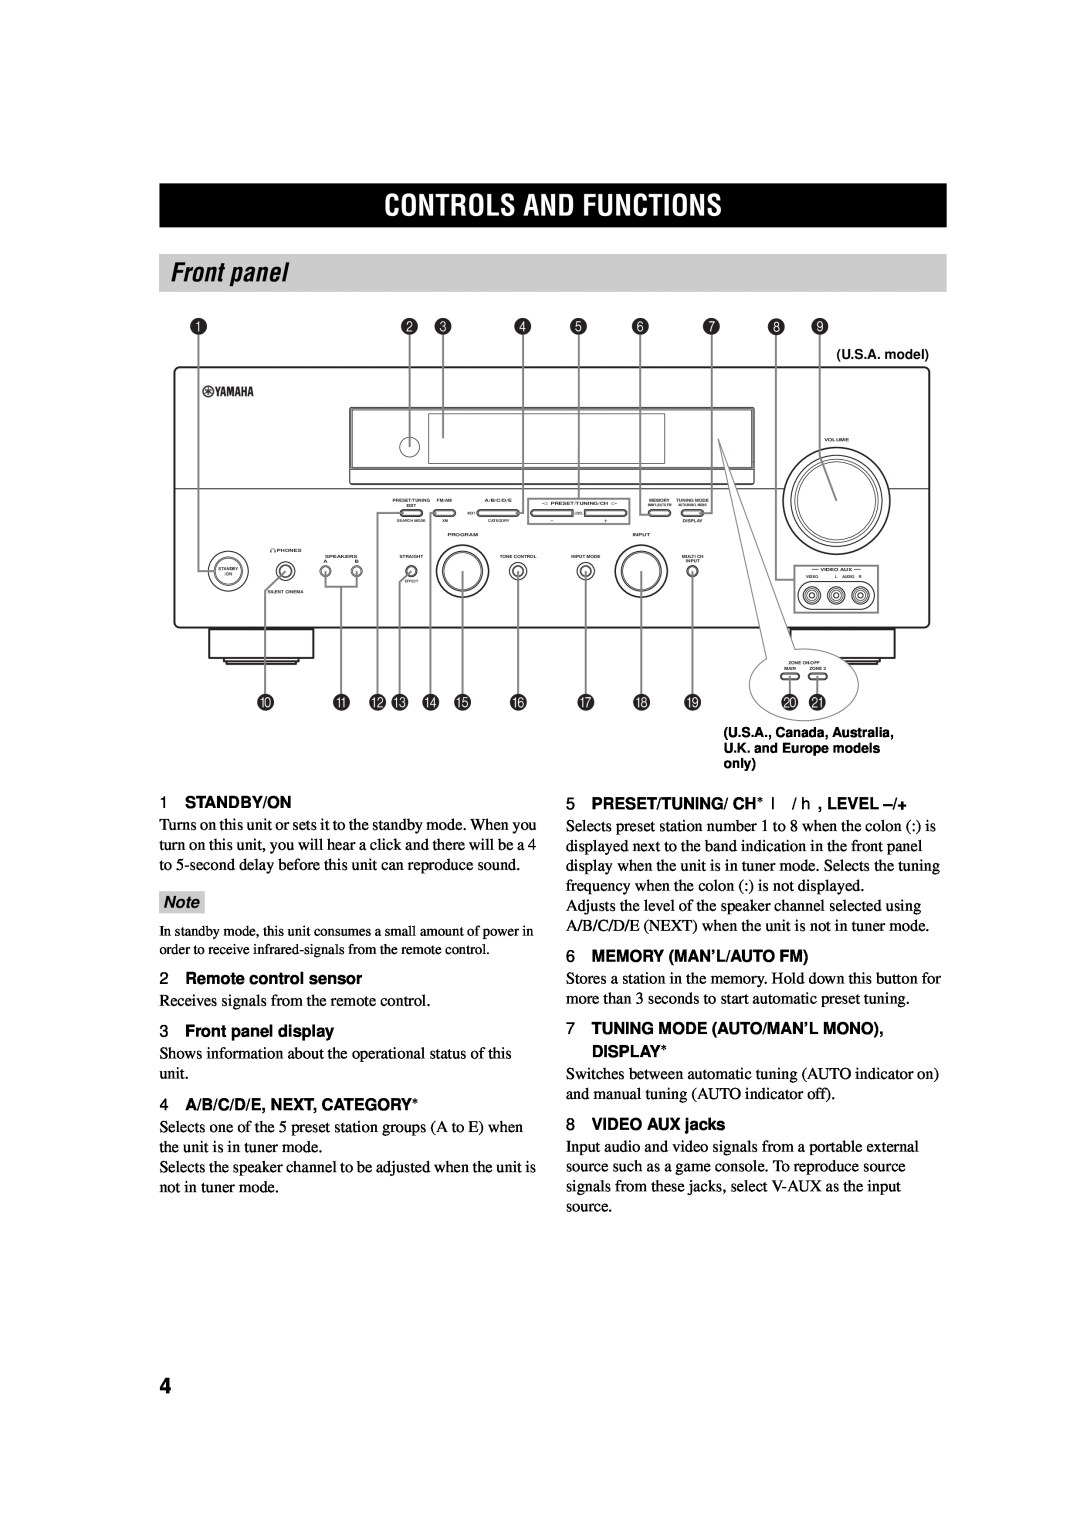 Yamaha AV Receiver owner manual Controls And Functions, Front panel, A B C D E F G H 